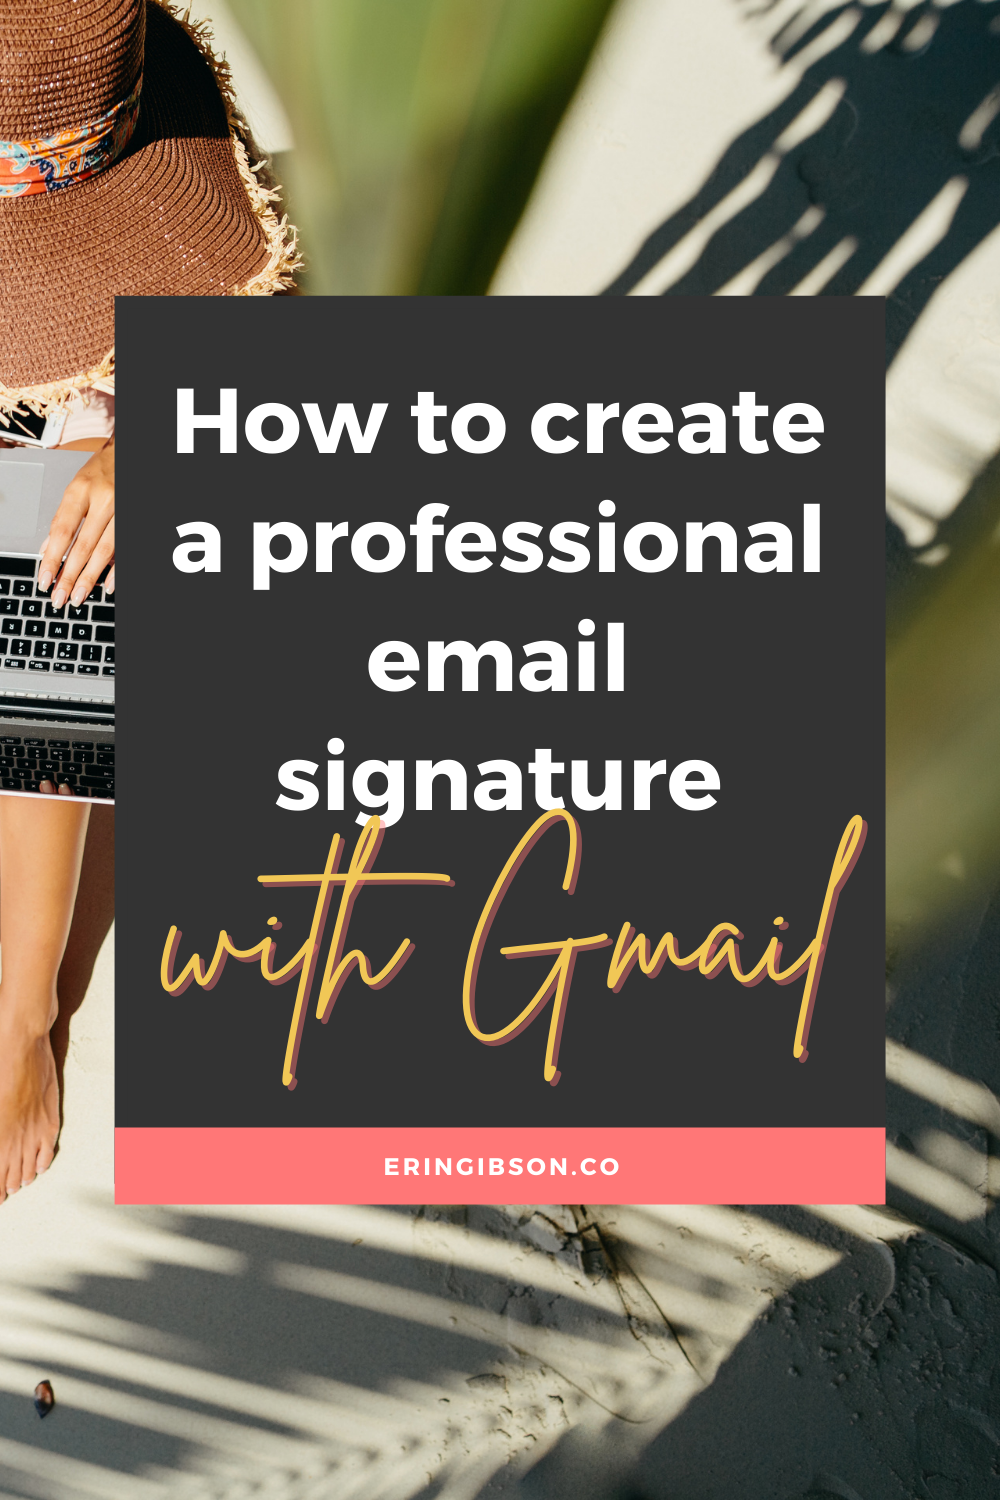 How to create a professional email signature in Gmail